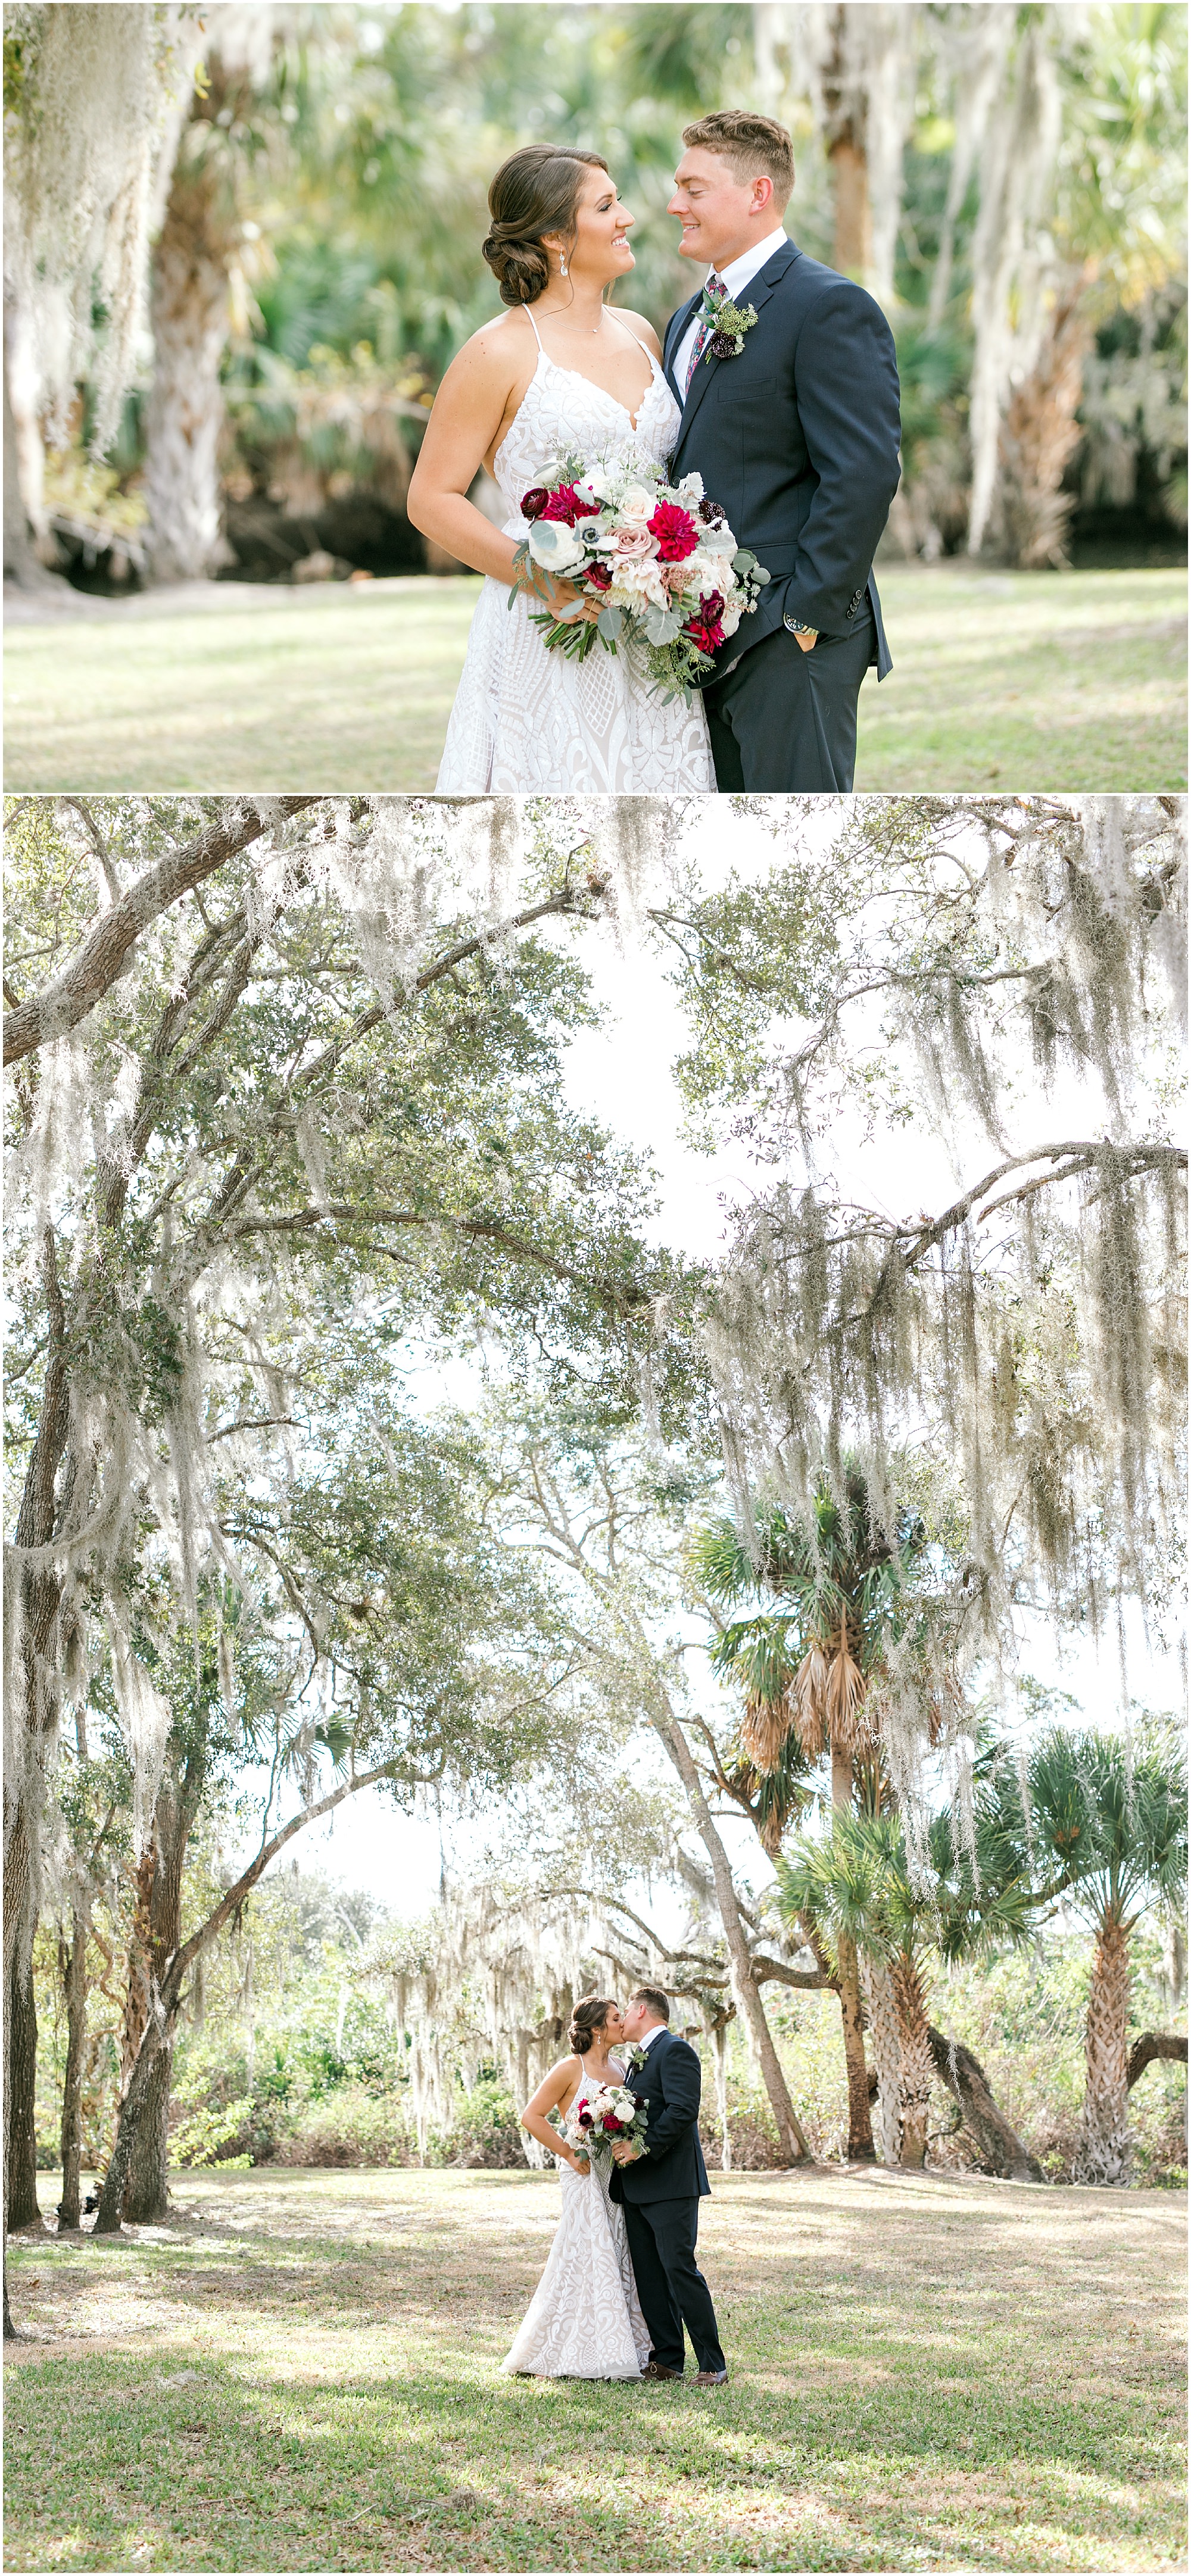 Dusty Rose and burgundy wedding couple kissing while standing under old oak trees with hanging moss